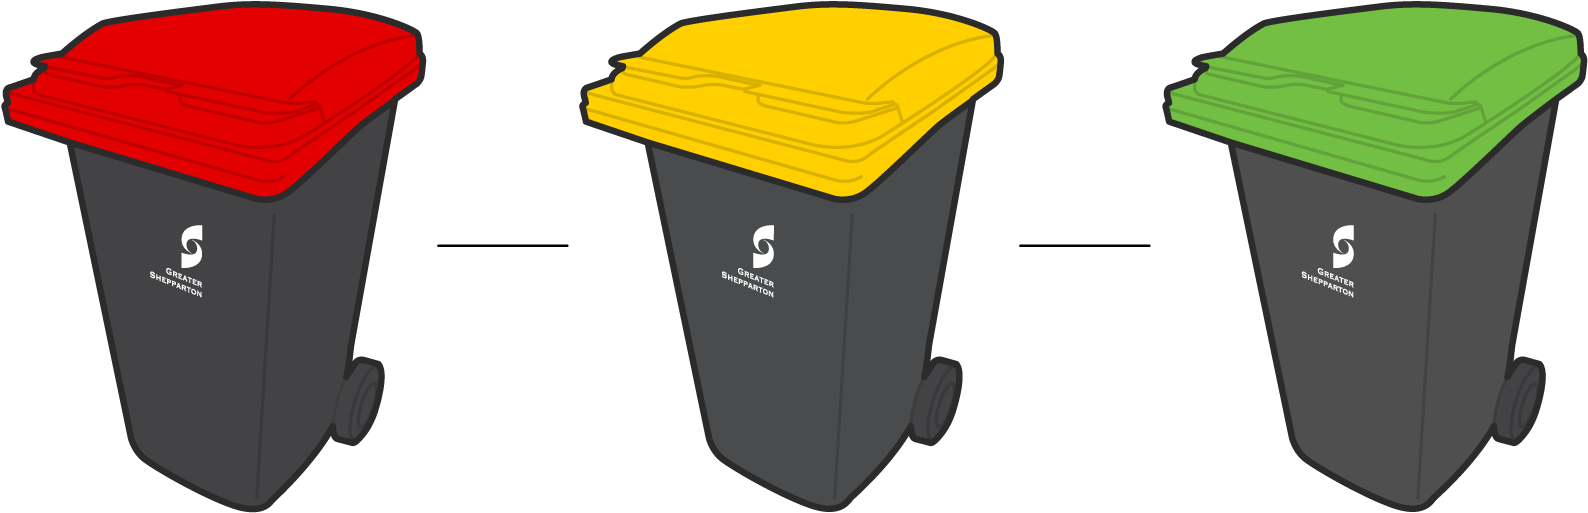 Recycling Bins Color Coded PNG image